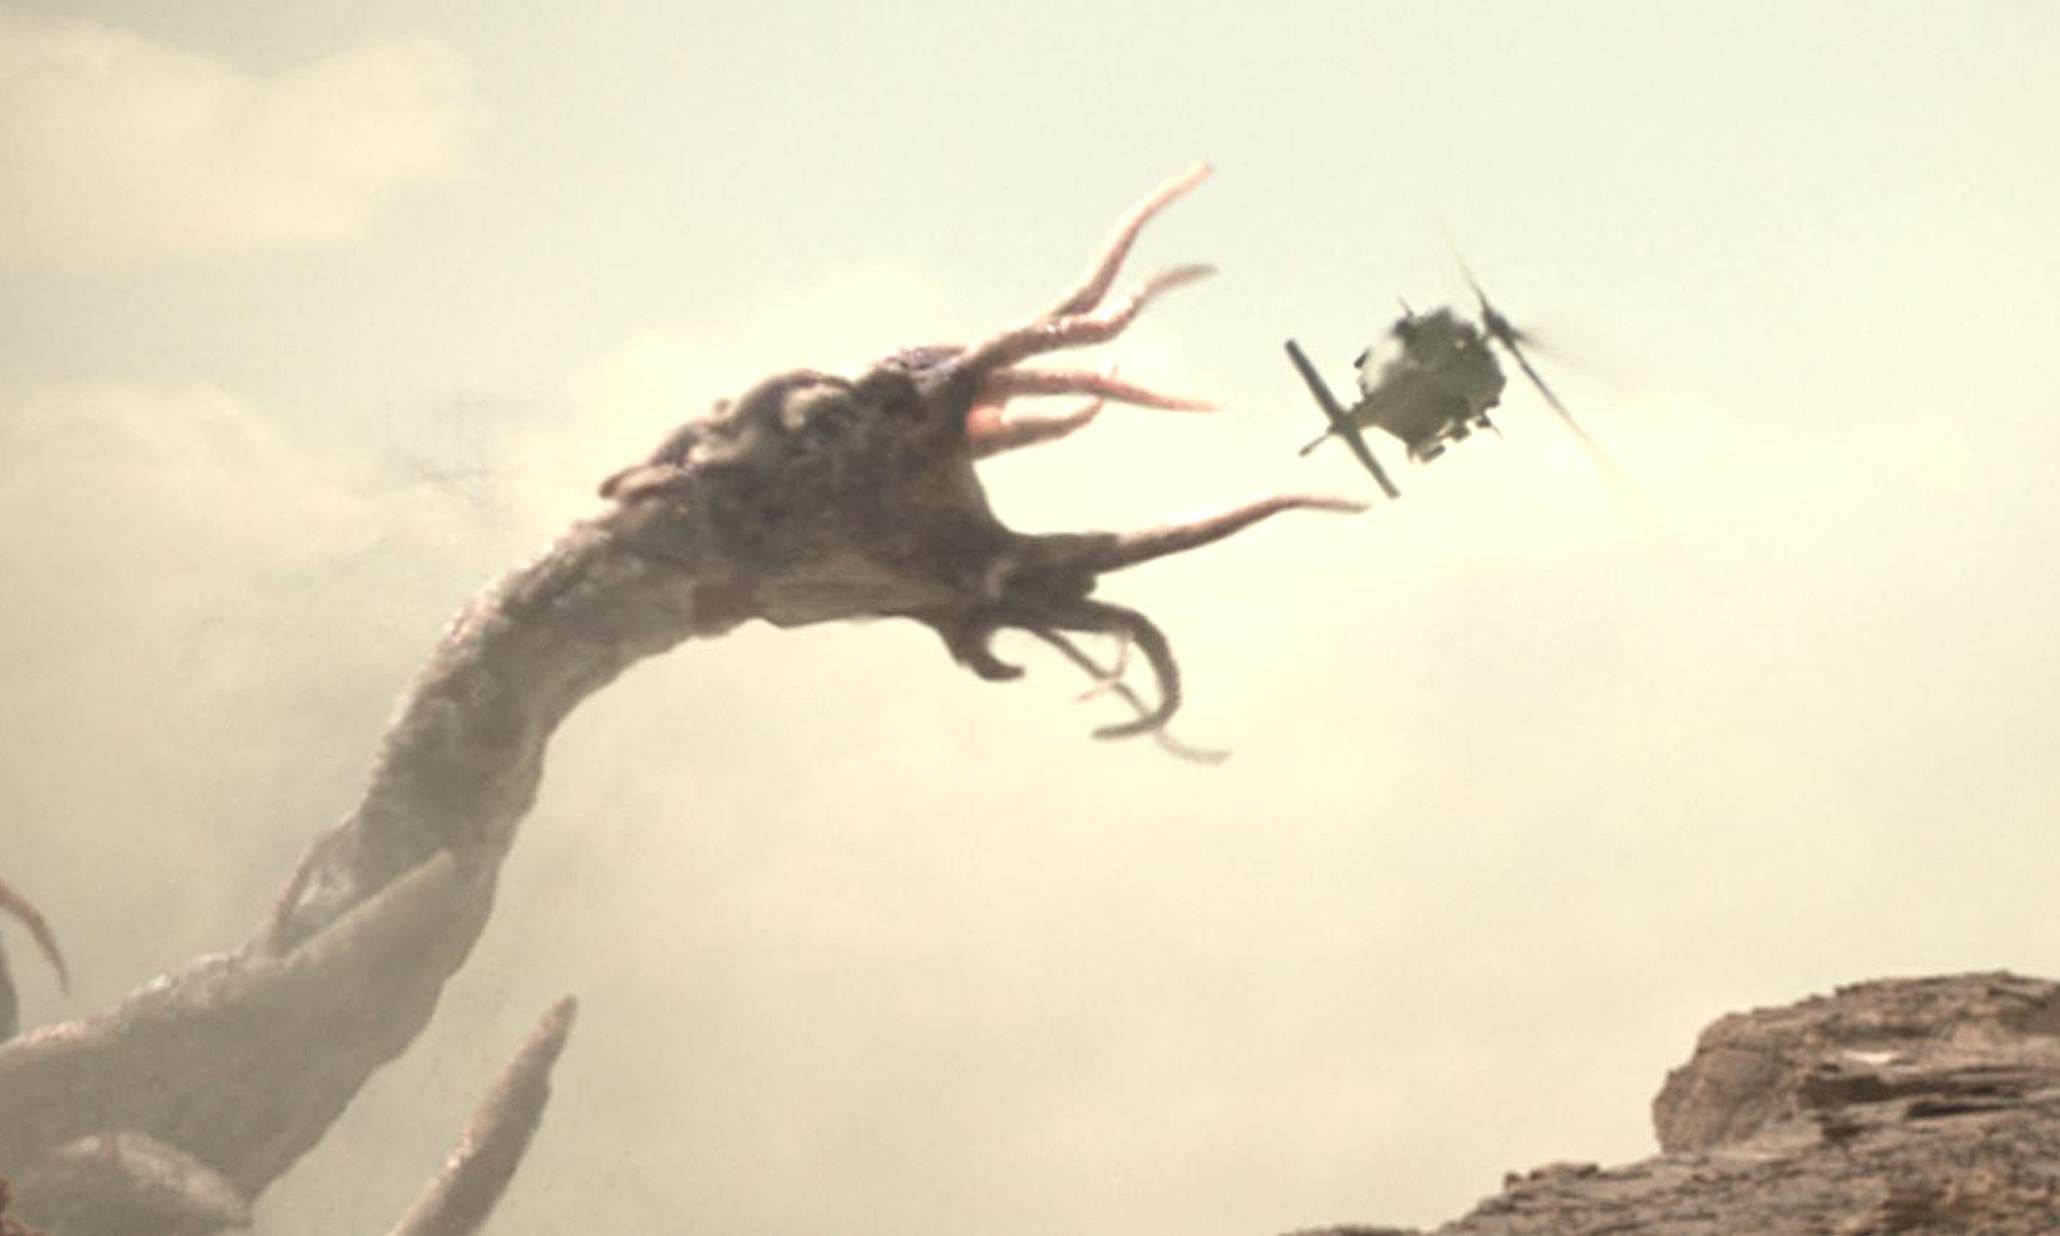 Monsters: Dark Continent